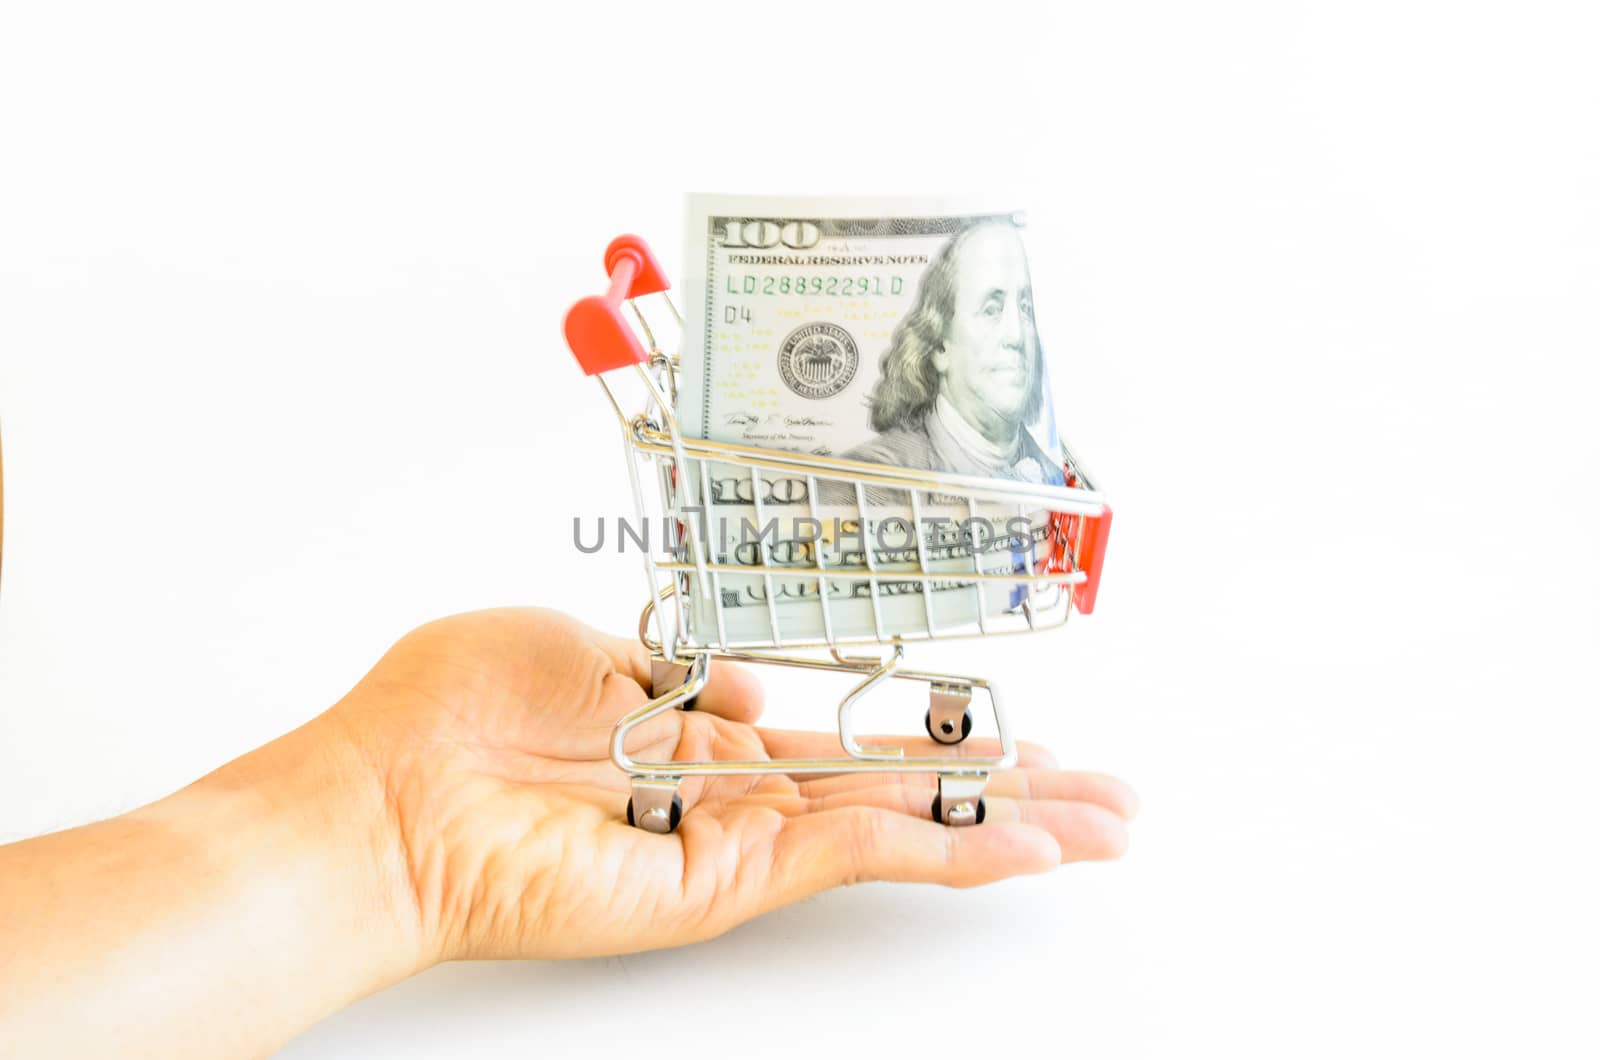 Selective focus Asian male hand holding small shopping cart with one hundred (100) dollars banknote inside. Blurry empty cart in moving concept of fast online shopping and spending